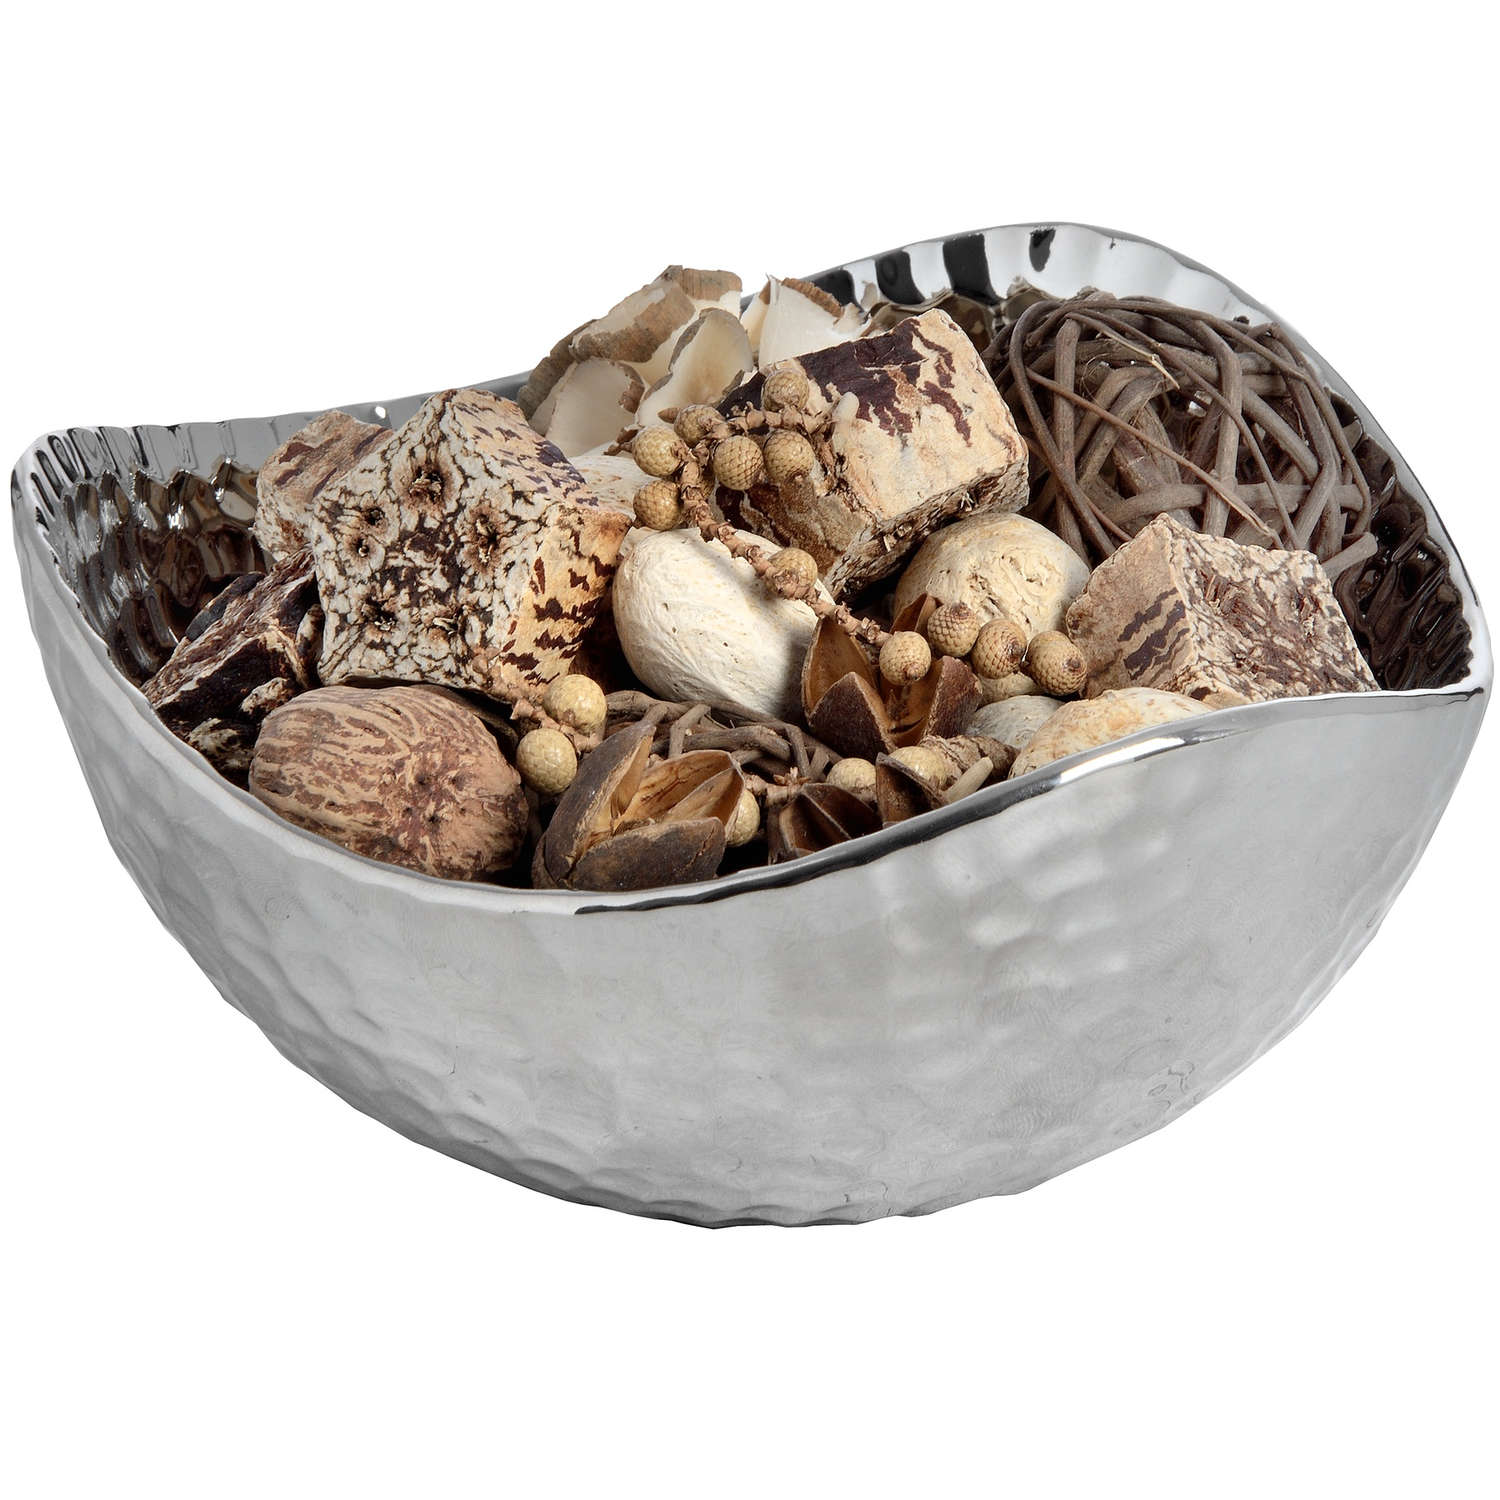 Silver Ceramic Dimple Effect Display Bowl - Small - Image 1